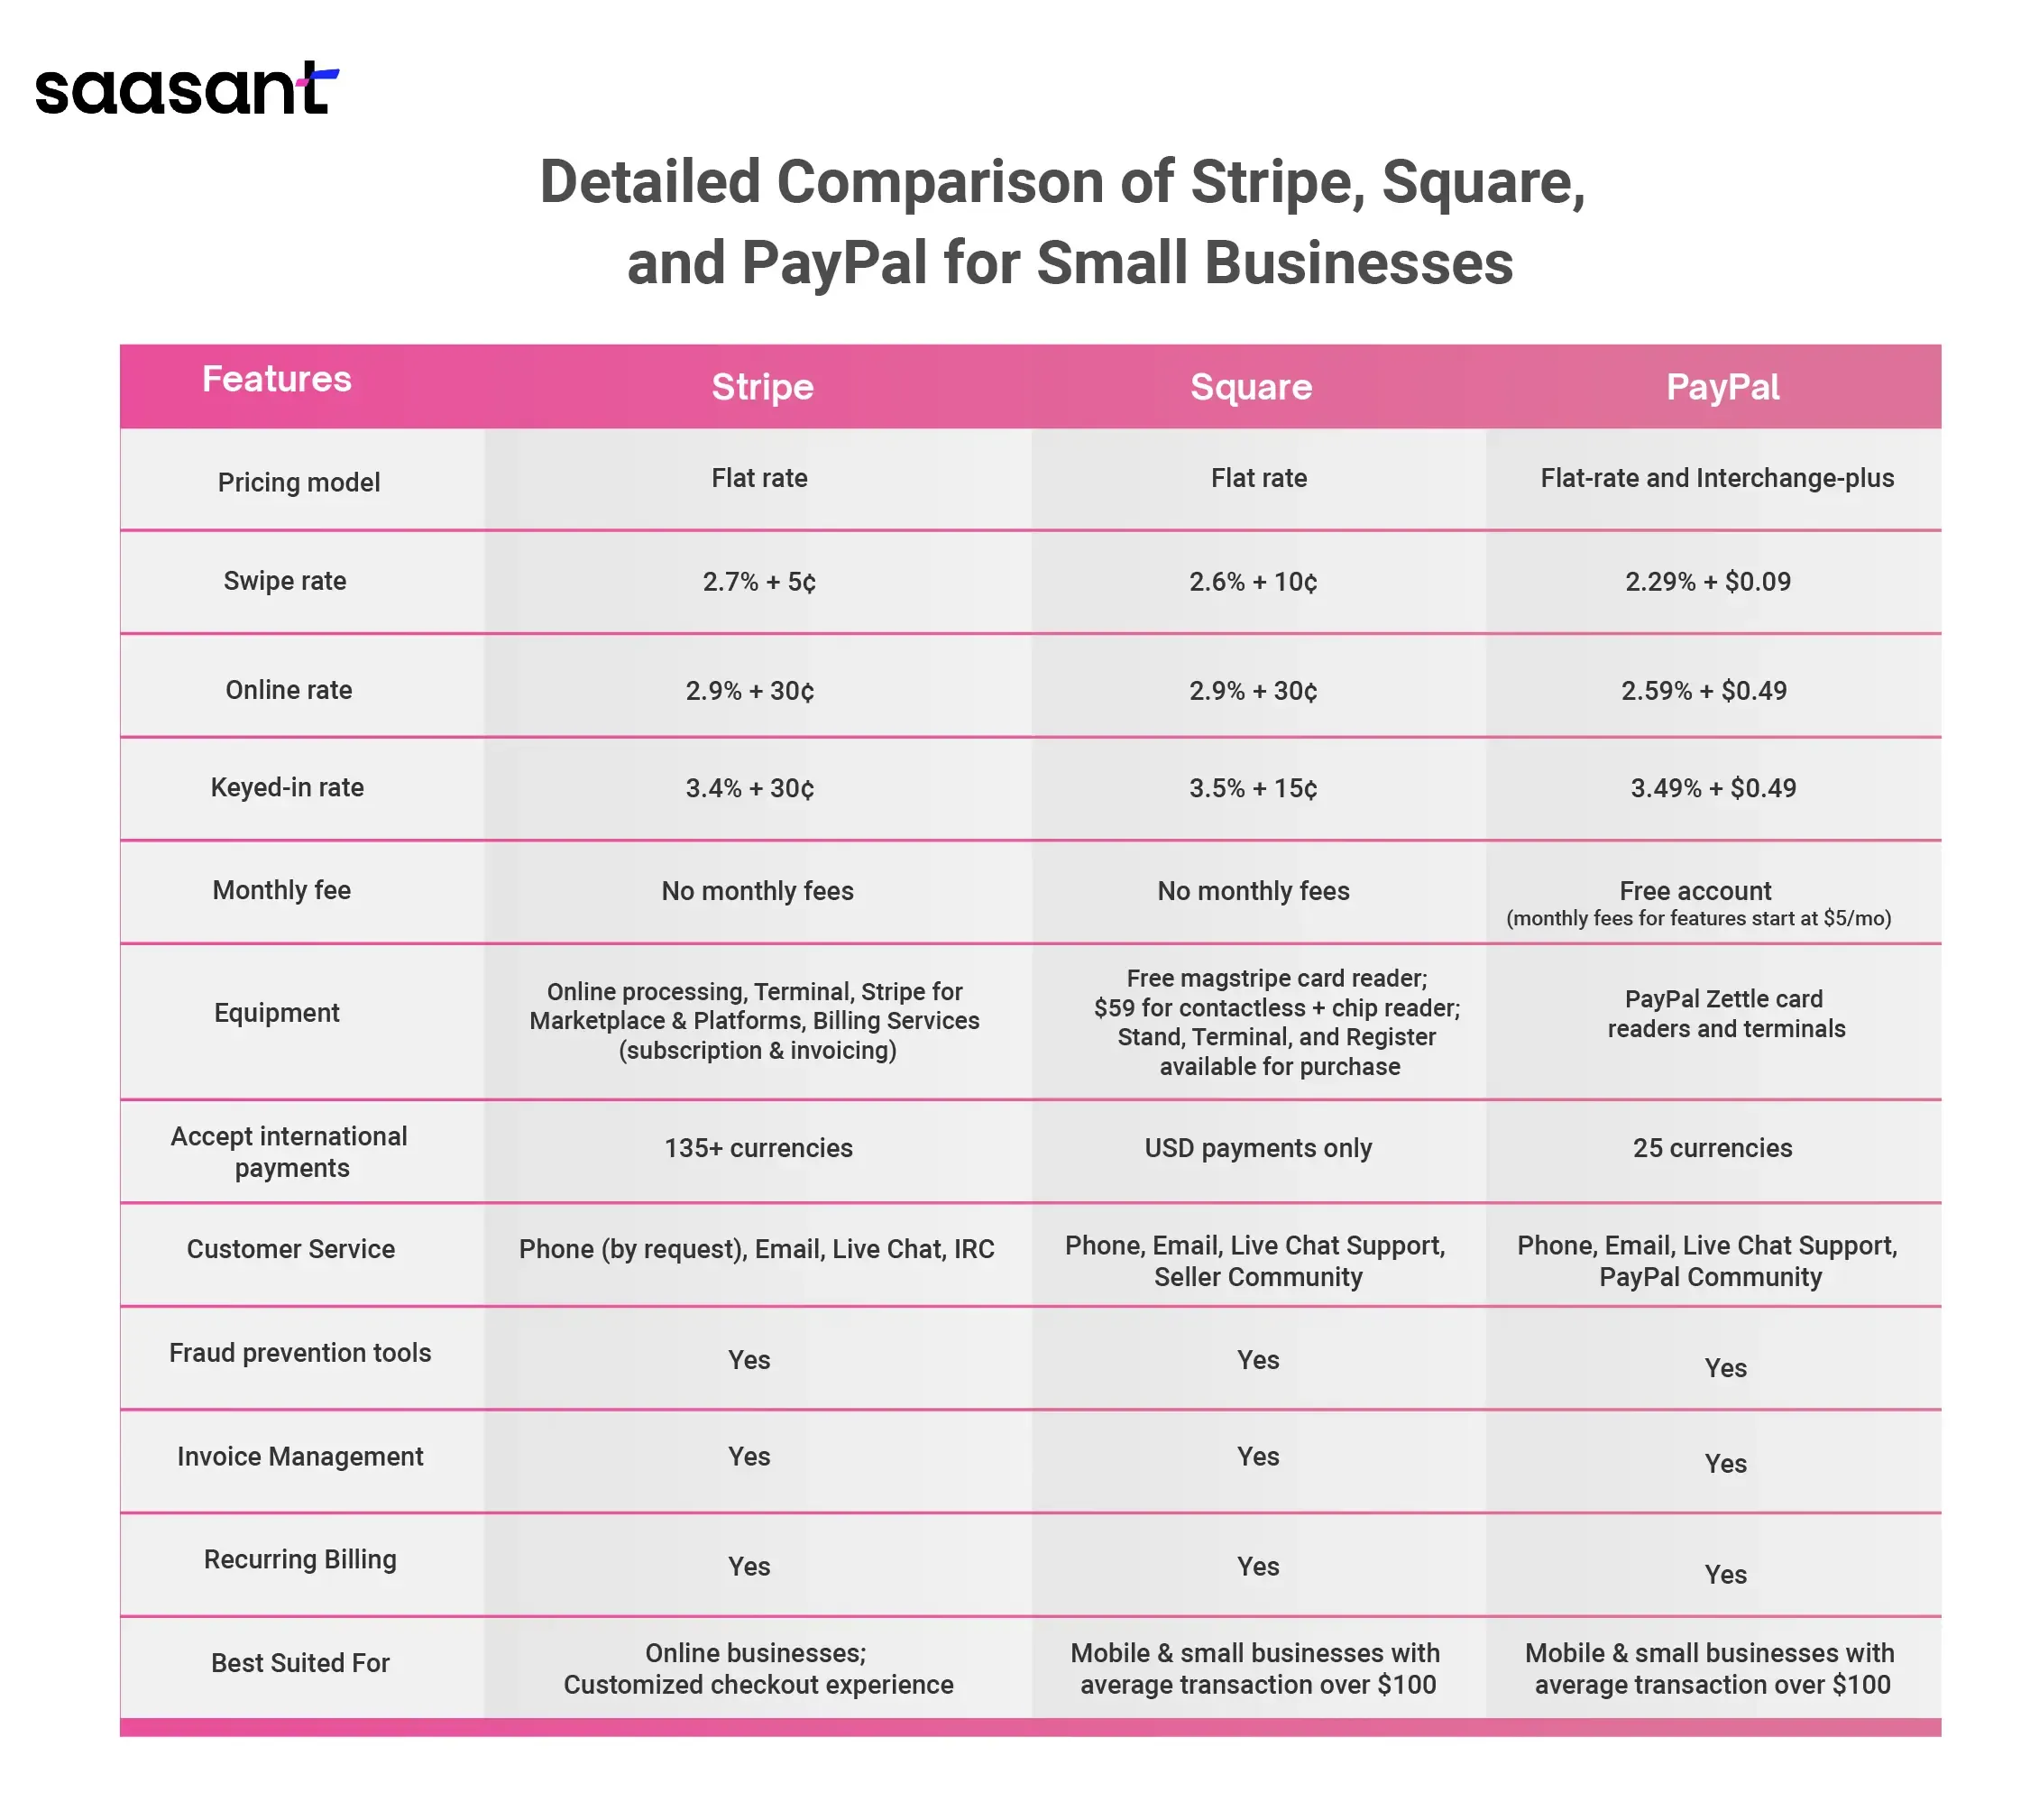 Detailed Comparison of Stripe, Square, and PayPal for Small Businesses (1).webp